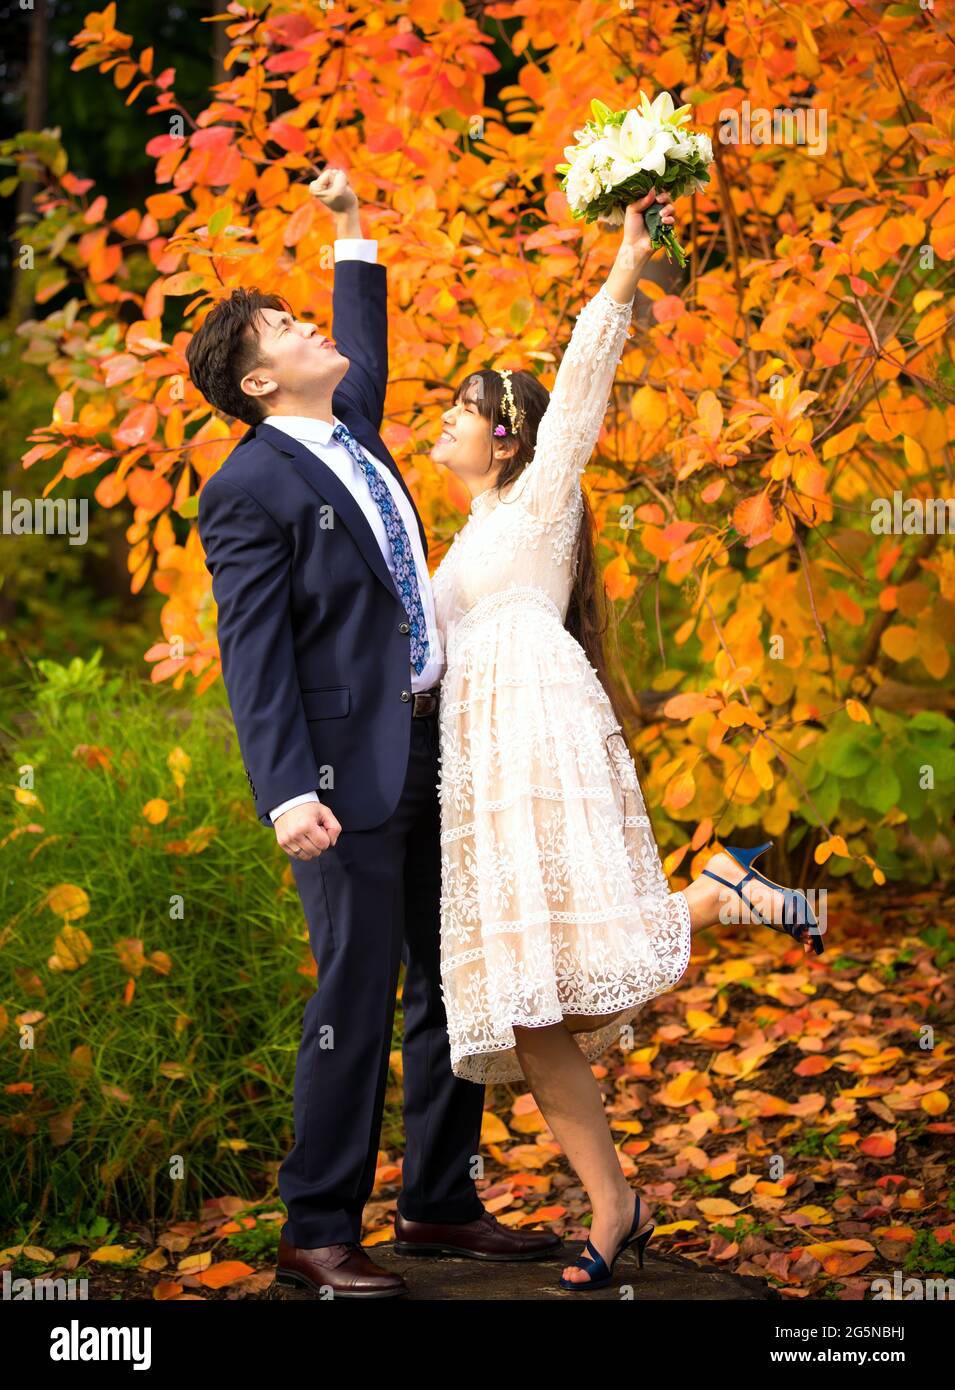 Newly married biracial bride and groom lifting up arms cheering after wedding while standing outdoors in autumn , bright orange leaves in background Stock Photo